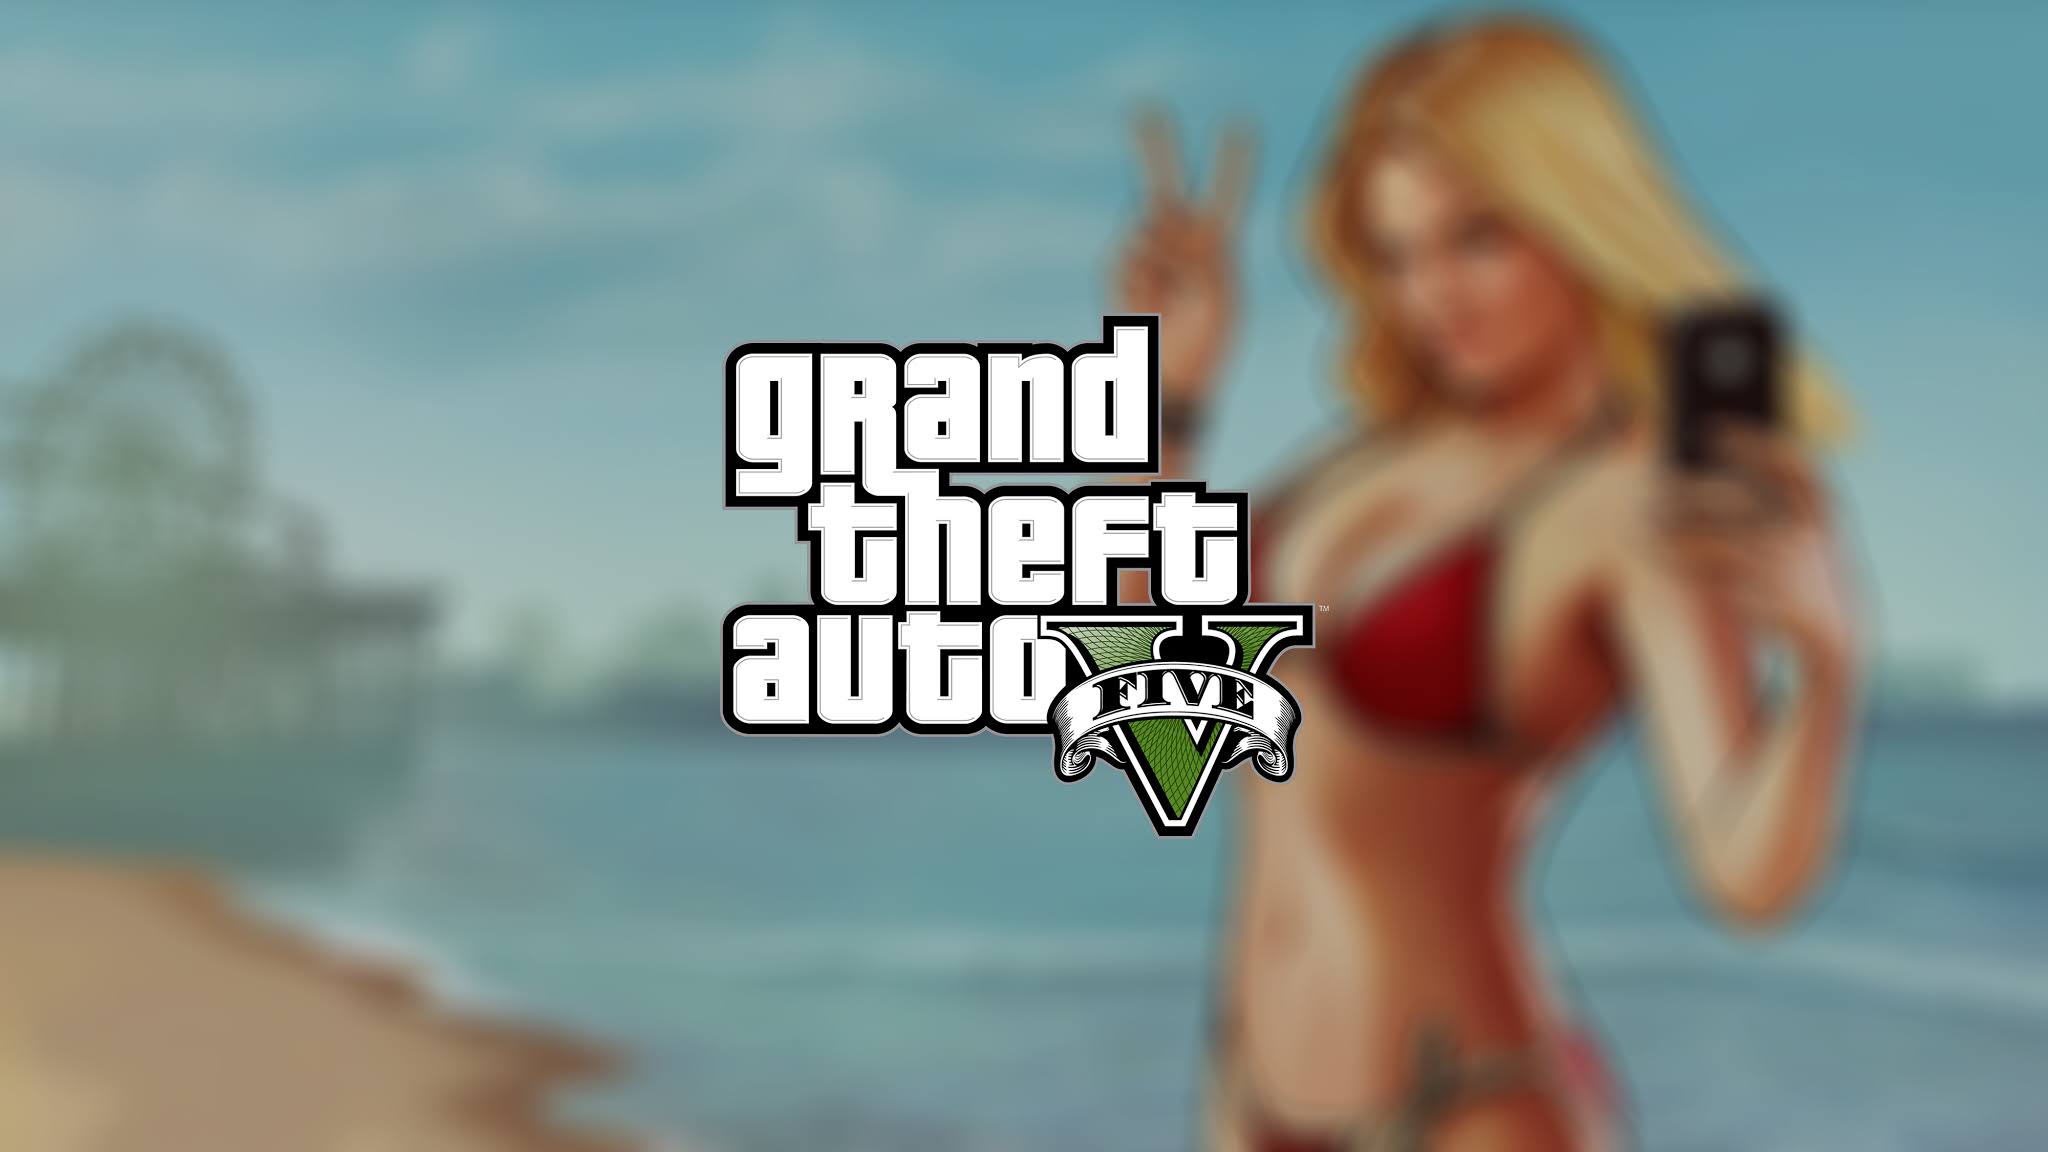 How to Change GTA 5 Loading Screen Bikini Girl to a different Character in Grand Theft Auto V Change Loading Screen Girl to a different Characters in GTA 5 - Easy Method!  gta v loading screen girl change, how to change loading screen in gta v, how to change gta 5 loading screen,hindi urdu gaming,change the image of beach lady during gta 5 loading,gta 5 girl images,how to skip loading screen in gta 5,gta v remove loading screen,gta 5 mods,open iv,gta 5,remove gta 5 girl,how to change screen loader of gta v on startup,    How To Change GTA 5 Loading Screen Girl image PC in Hindi GTA 5 Change Intro Loading Screen girl GTA Gamer Change Intro Loading Screen How to change the loading screen of GTA V on startup change screen loader of gta V HOW TO ADD YOUR PHOTO PICTURE IN GTA V LOADING SCREEN HOW TO CHANGE LOADING SCREEN IN GTA V how you can change the GTA V loading screen and add your photo in the GTA V loading start screen intro how to change gta 5 loading screen bikini girl to a different character HOW TO CHANGE GTA 5 LOADING SCREENS GAMEPLAY GTA 5 MODS how can you change your GTA 5 loading screens full tutorial how to change screen loader of gta v on startup gta screen how to change screen loader of gta v change screen loader of gta v how to changeoader of gta v adeel drew how to change the loading screen of gta v on startup how to change the loading screen of gta v gta v mod best mod safe mod gta v